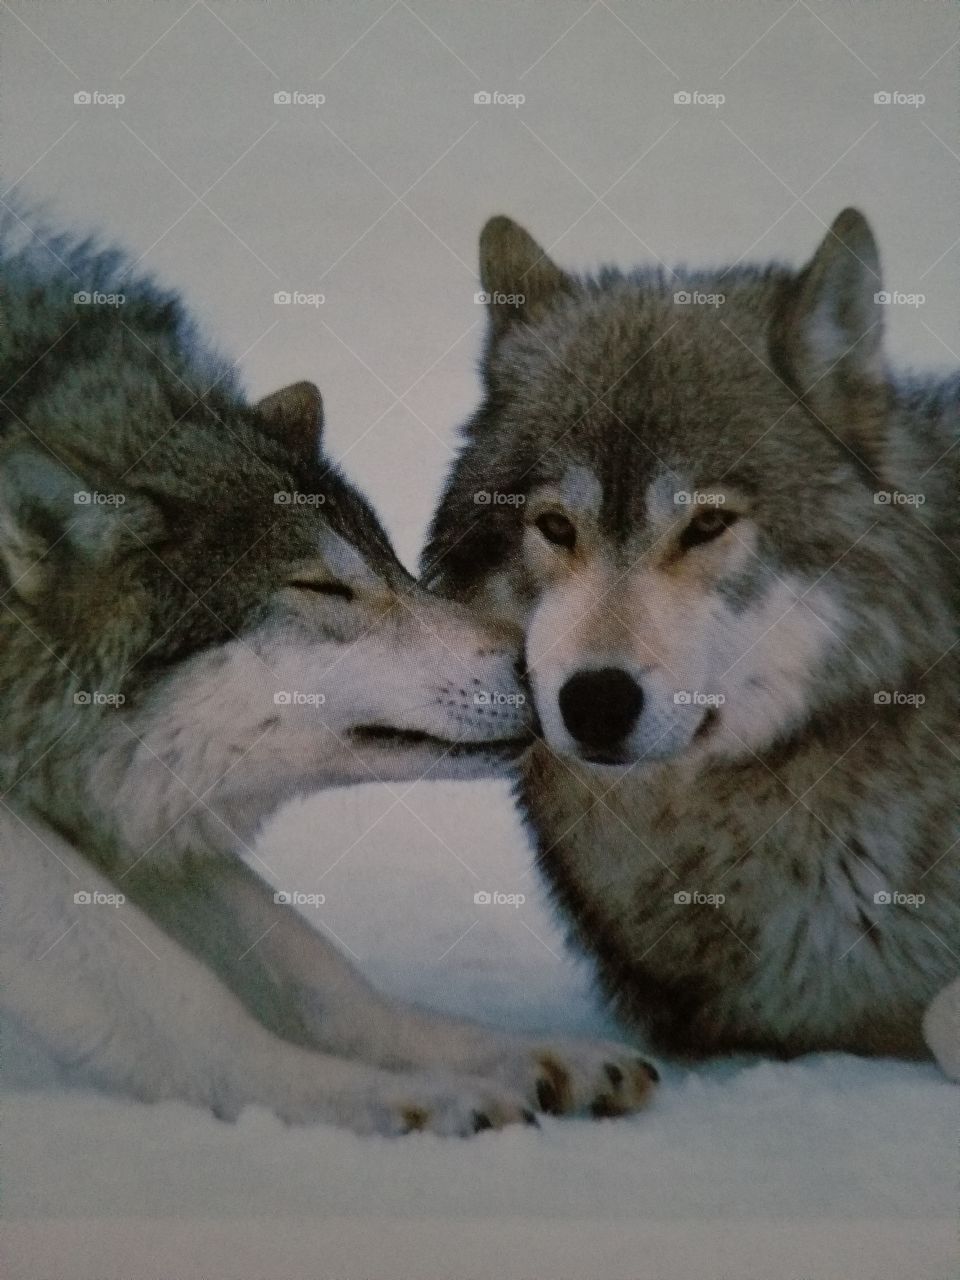 Wolves are very social, so I anticipated some kind of interaction when these two woke from their naps.